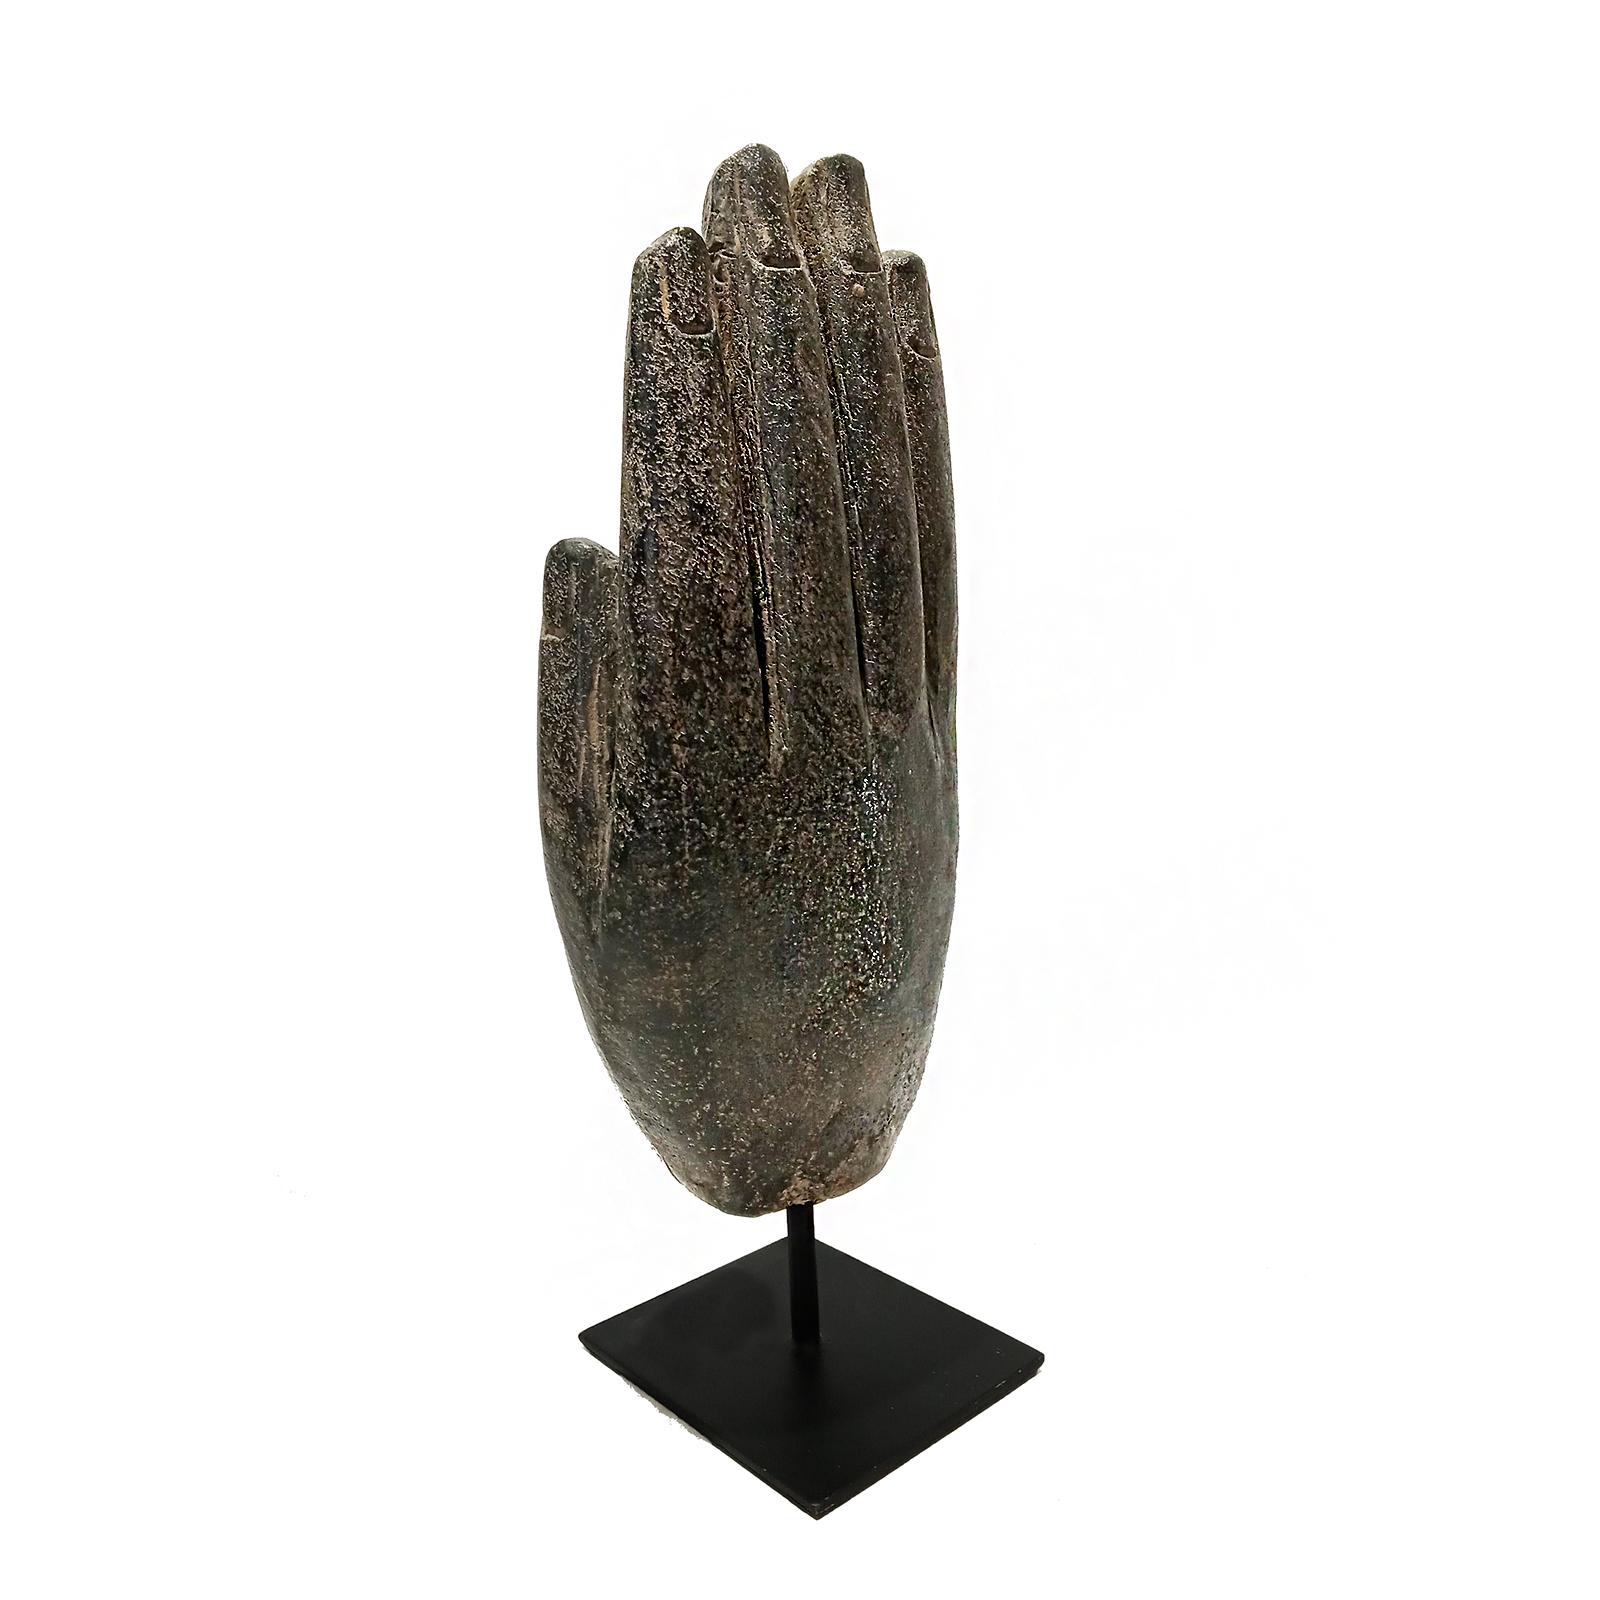 Three Volcanic Rock Hand Sculptures, Mid 20th Century For Sale 1